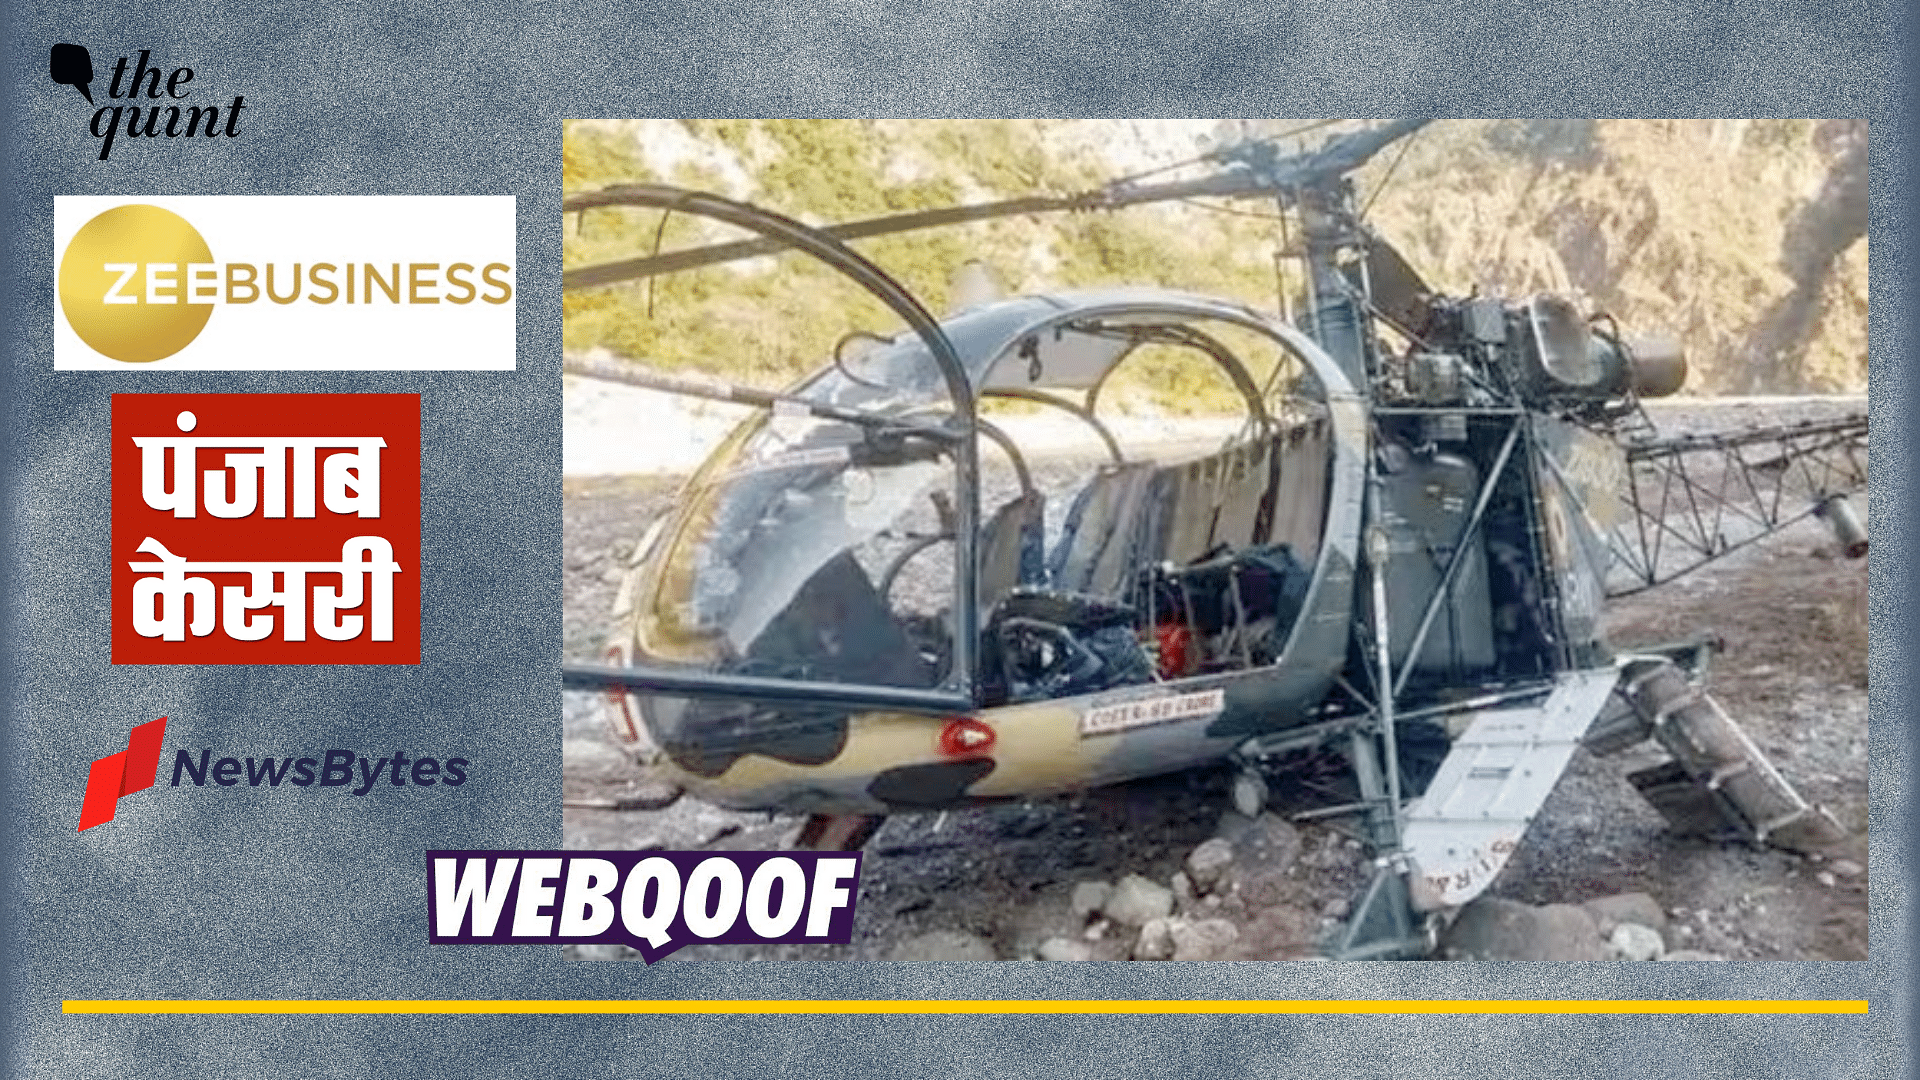 <div class="paragraphs"><p>Fact-Check: The image is three years old and shows a crashed helicopter in Jammu and Kashmir.</p></div>